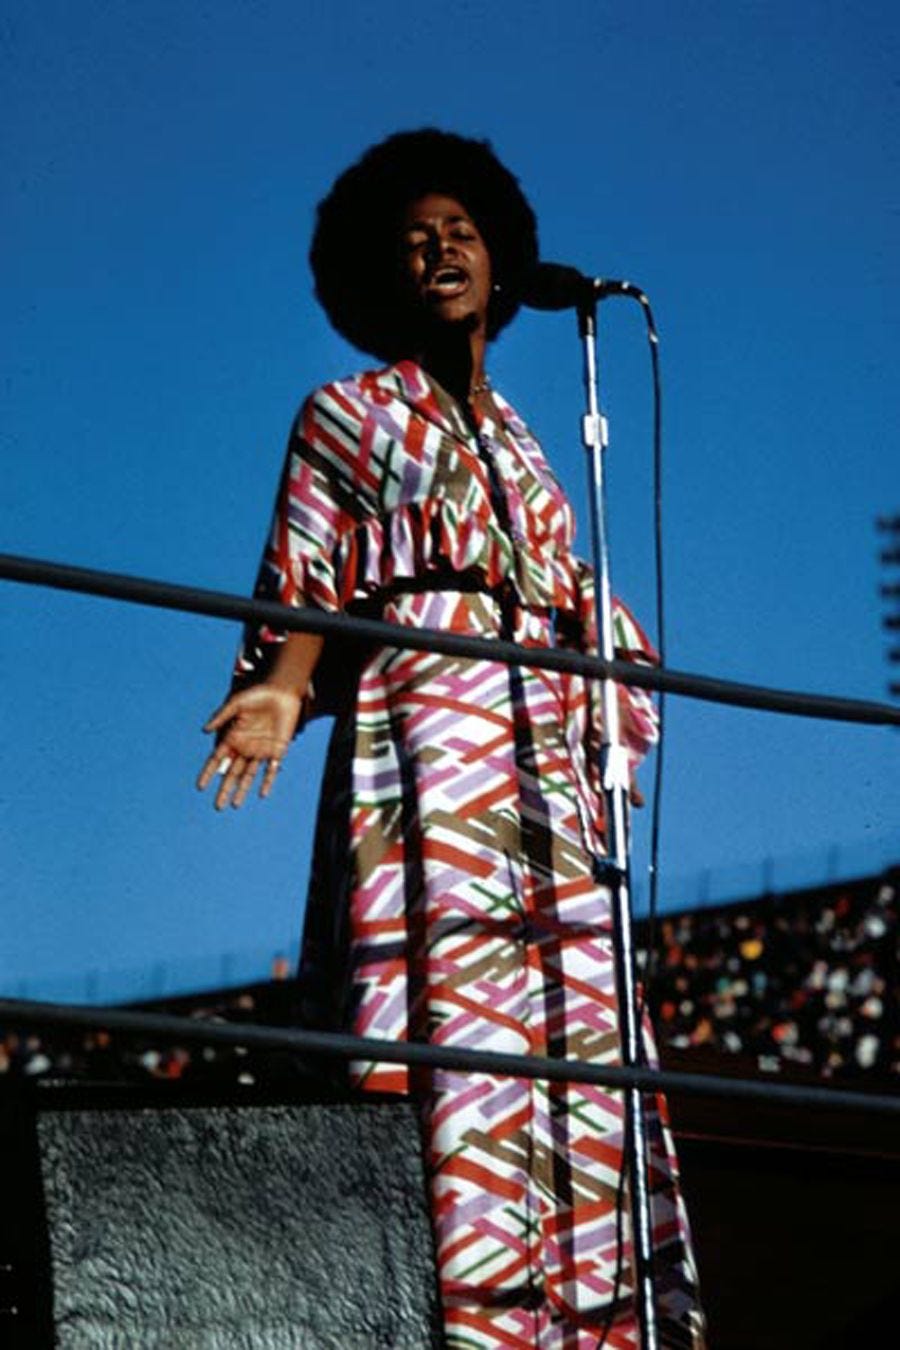 CARLA THOMAS on stage in 1972 at the Wattstax Festival in Los Angeles...